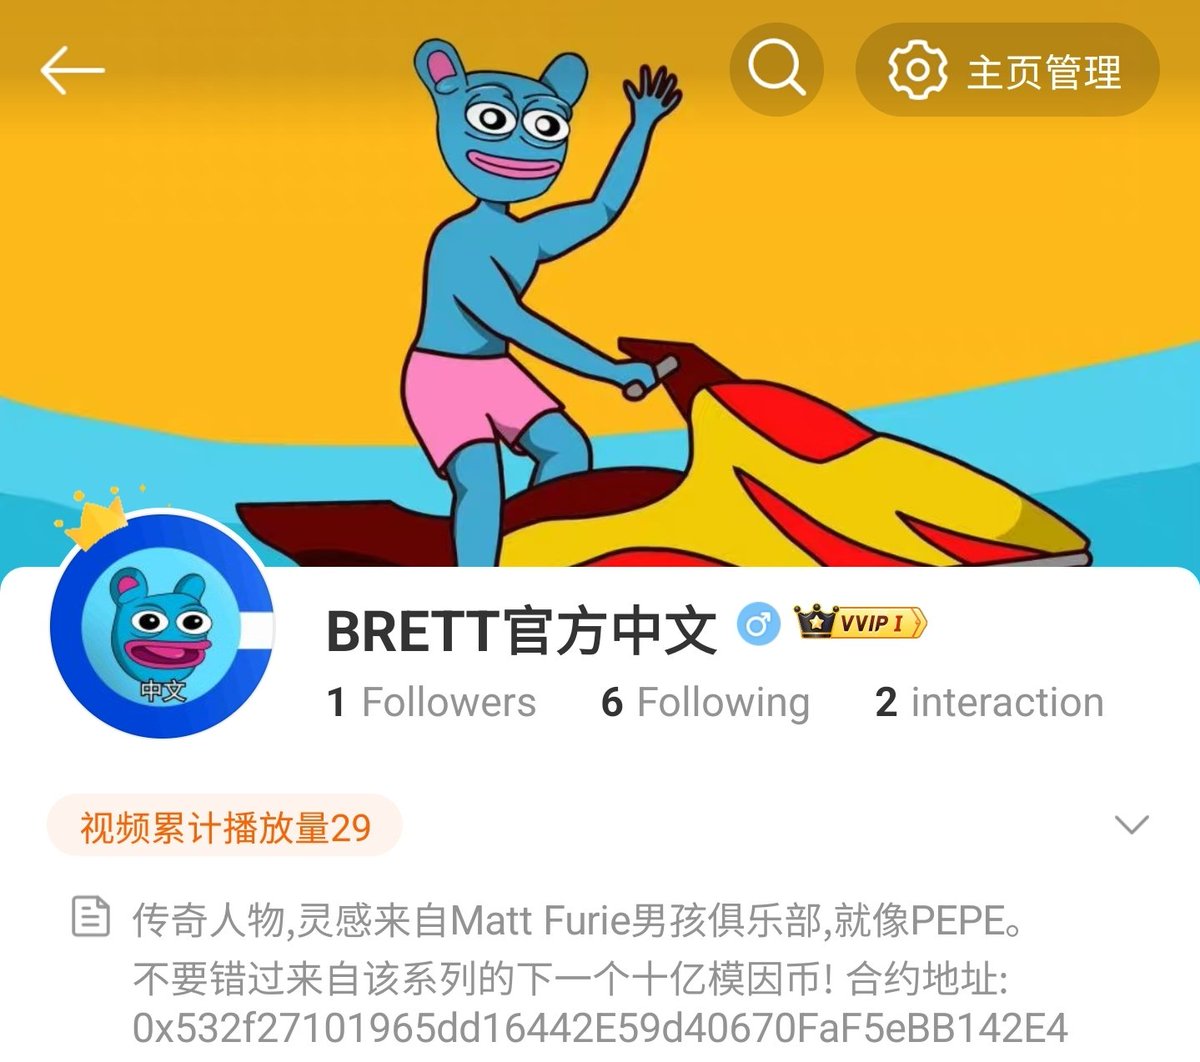 Brett is now on weibo 微博. 

Share with all your Chinese bros 💪

weibo.com/u/7919857823